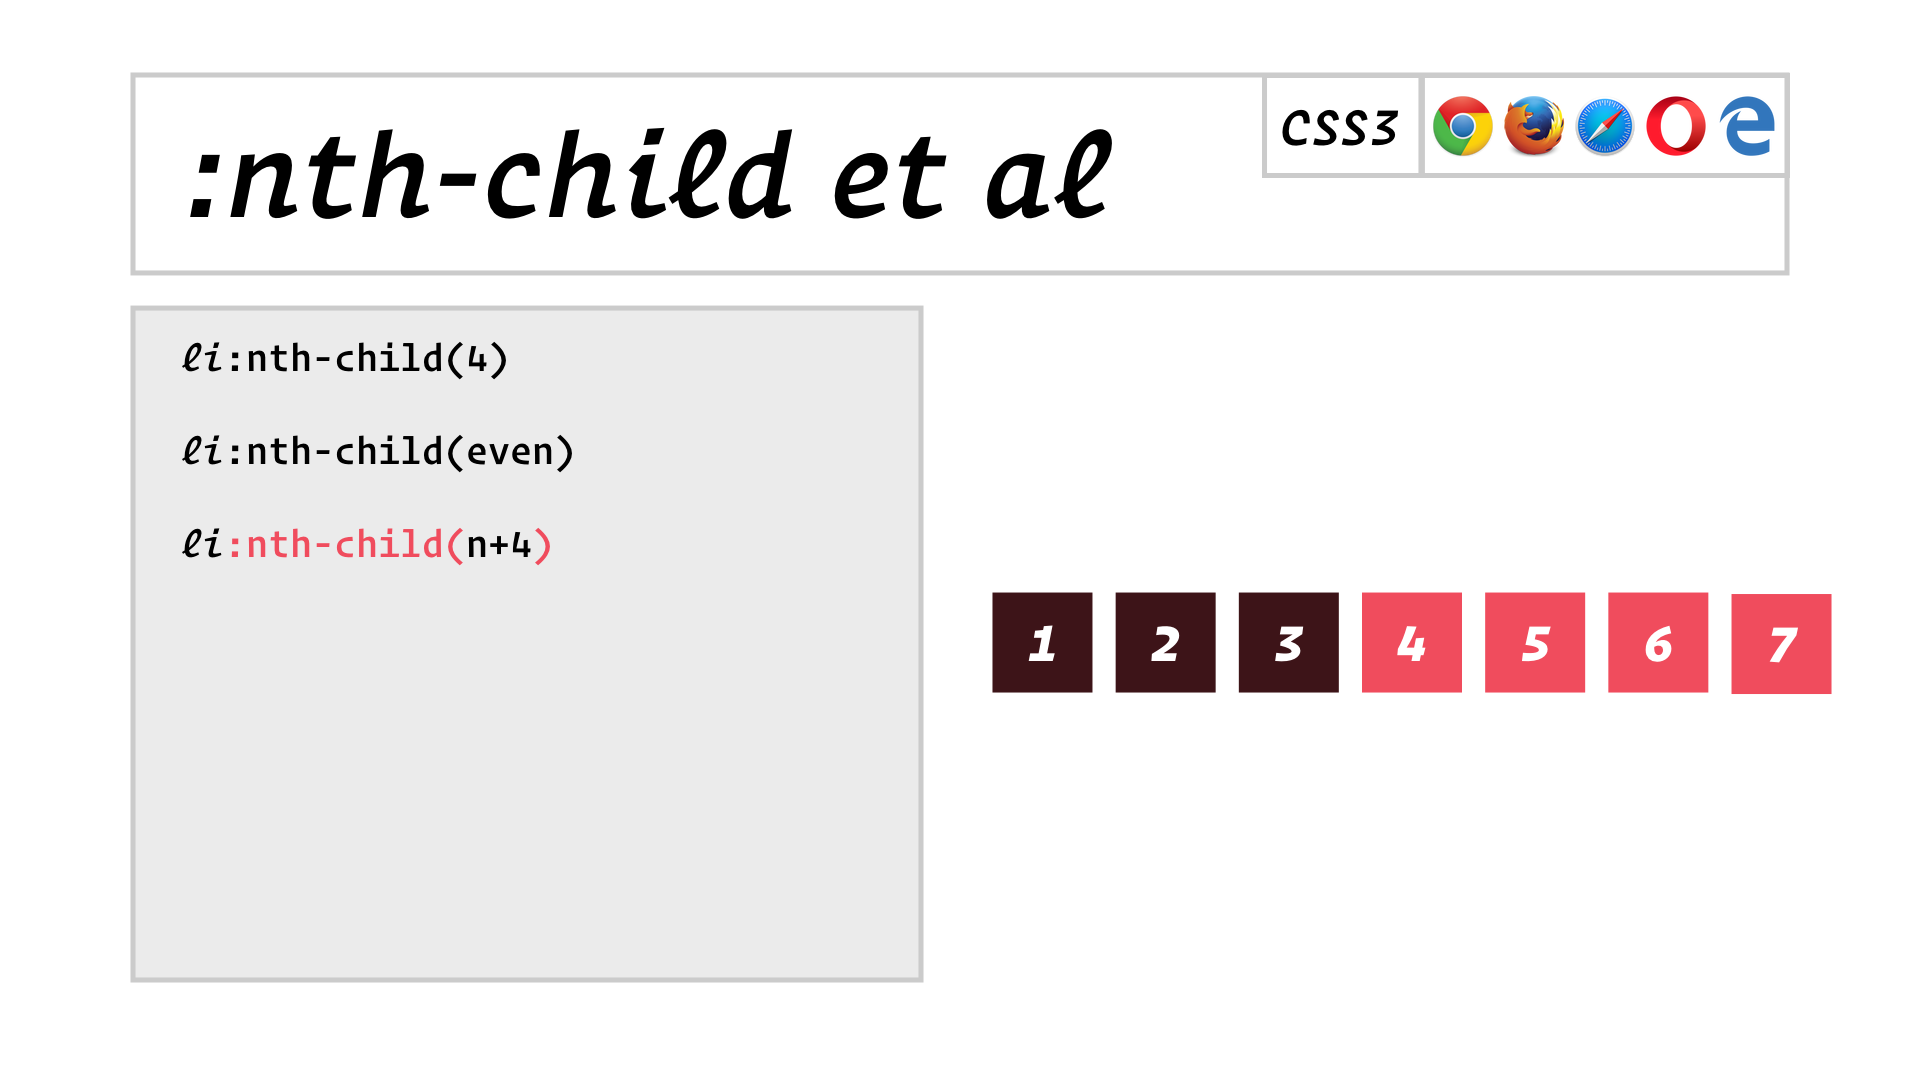 slide: :nth-child(n+4) selects the 4th, 5th, 6th child and so on